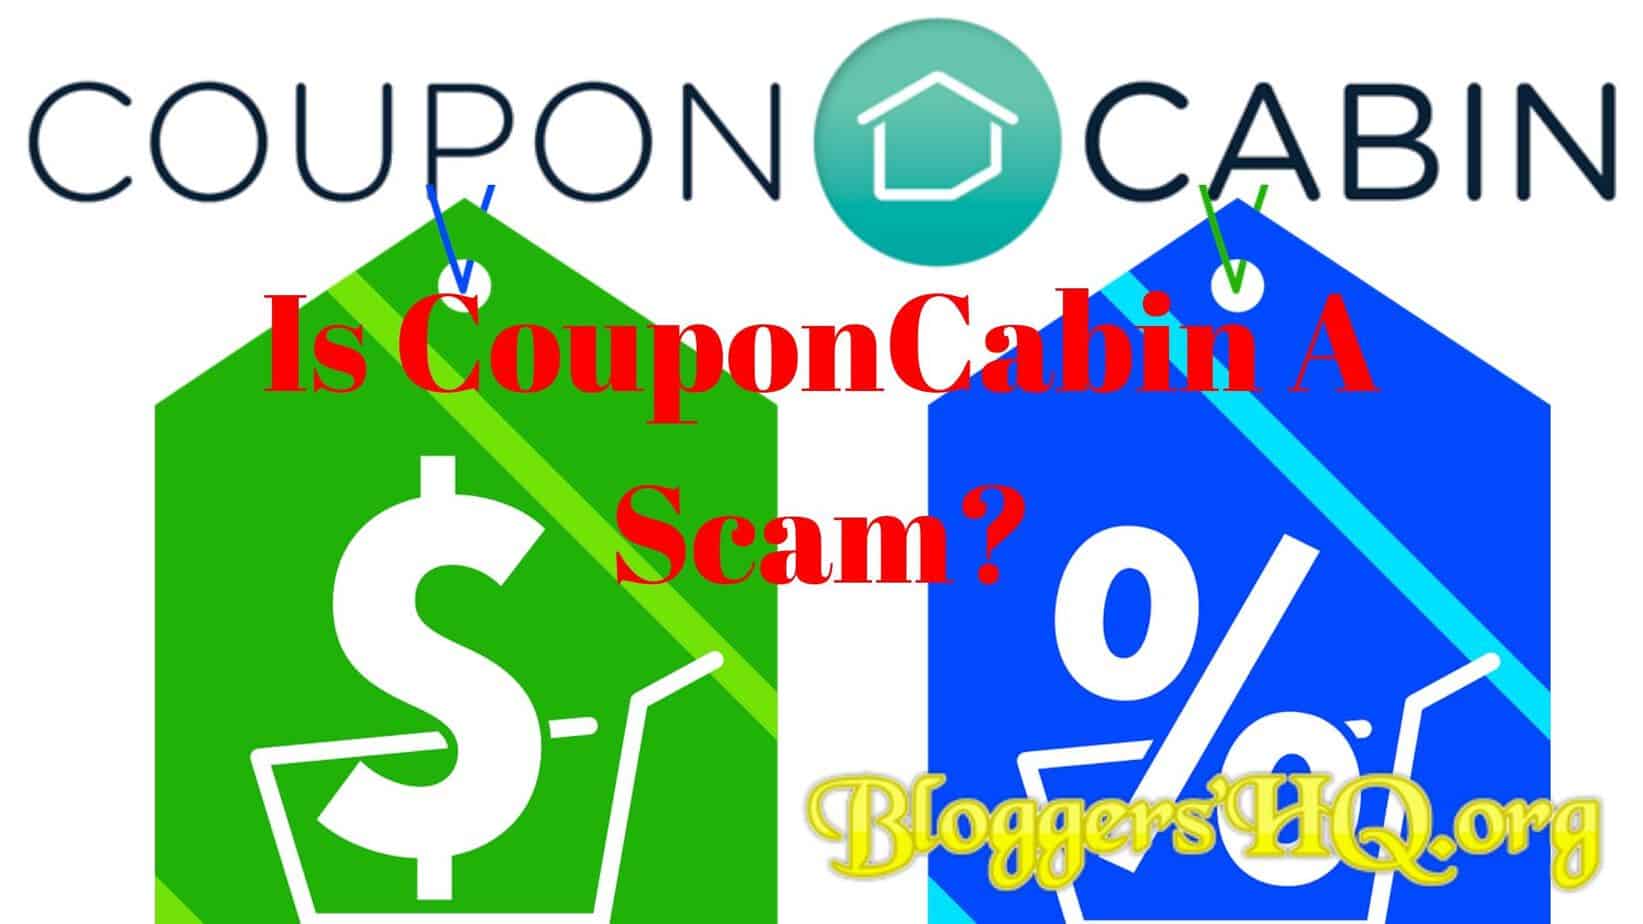 Is Couponcabin A Scam An Honest Review Updated Bloggershq Org